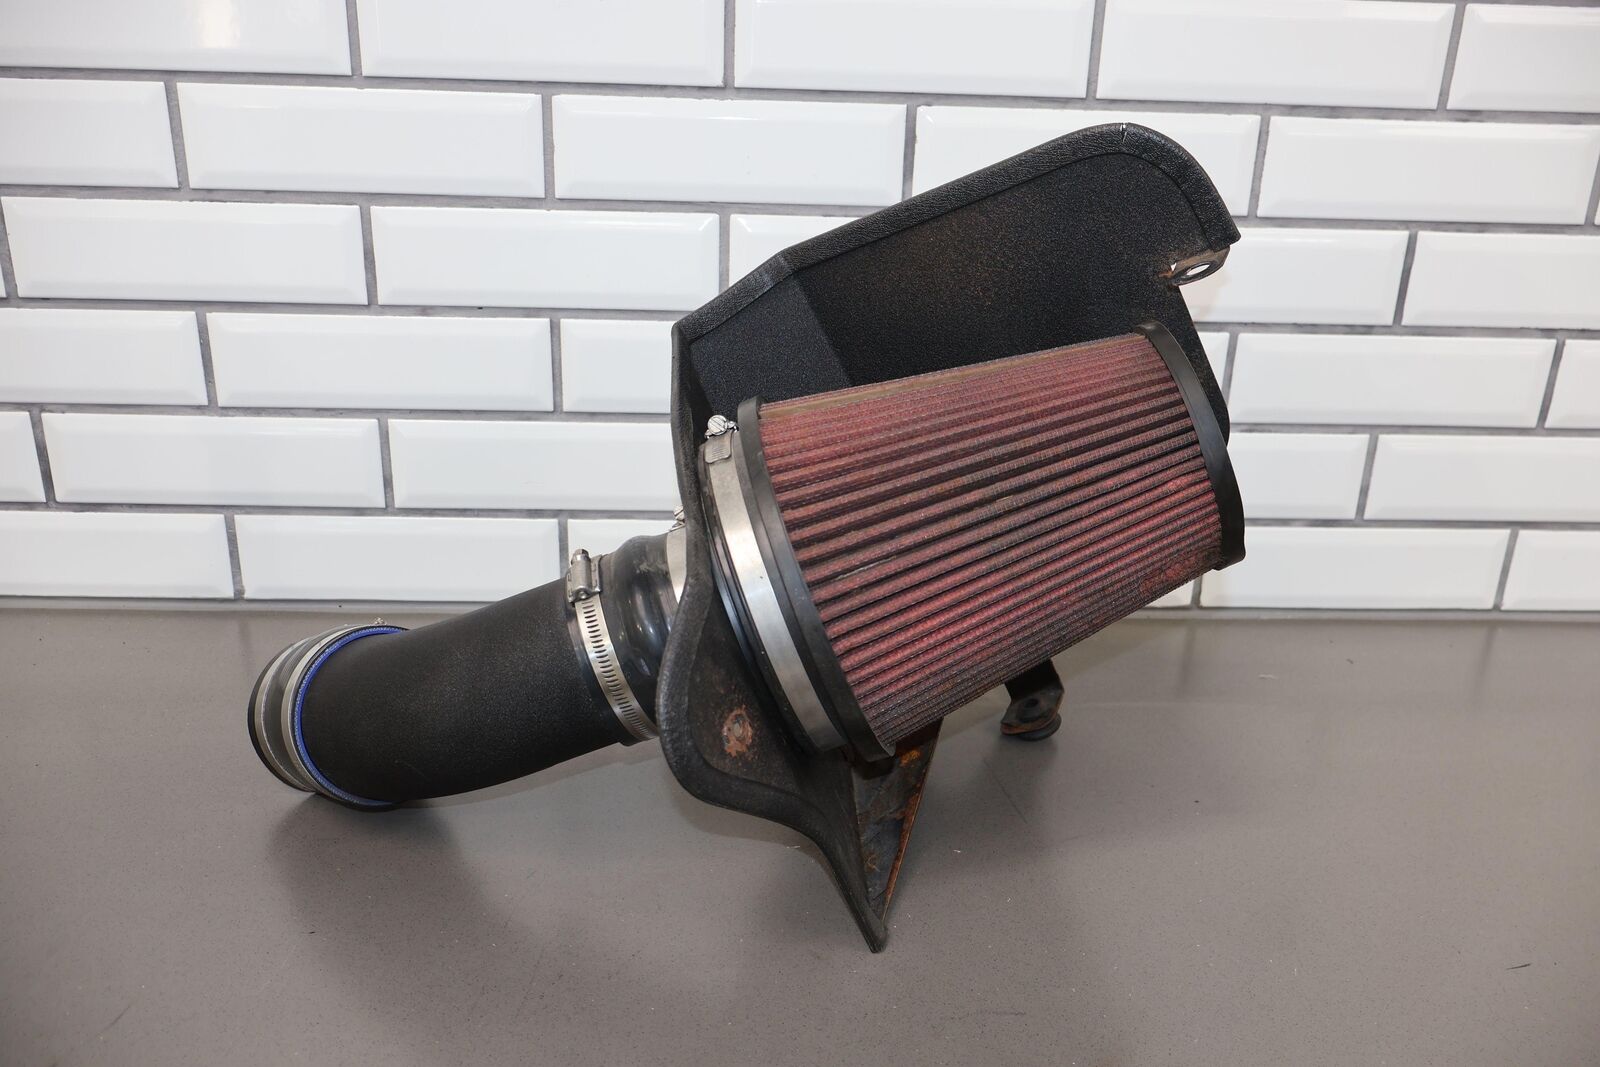 14-16 Jeep Grand Cherokee SRT8 6.4L Aftermarket Cold Air Intake W/ FIlter (96K)